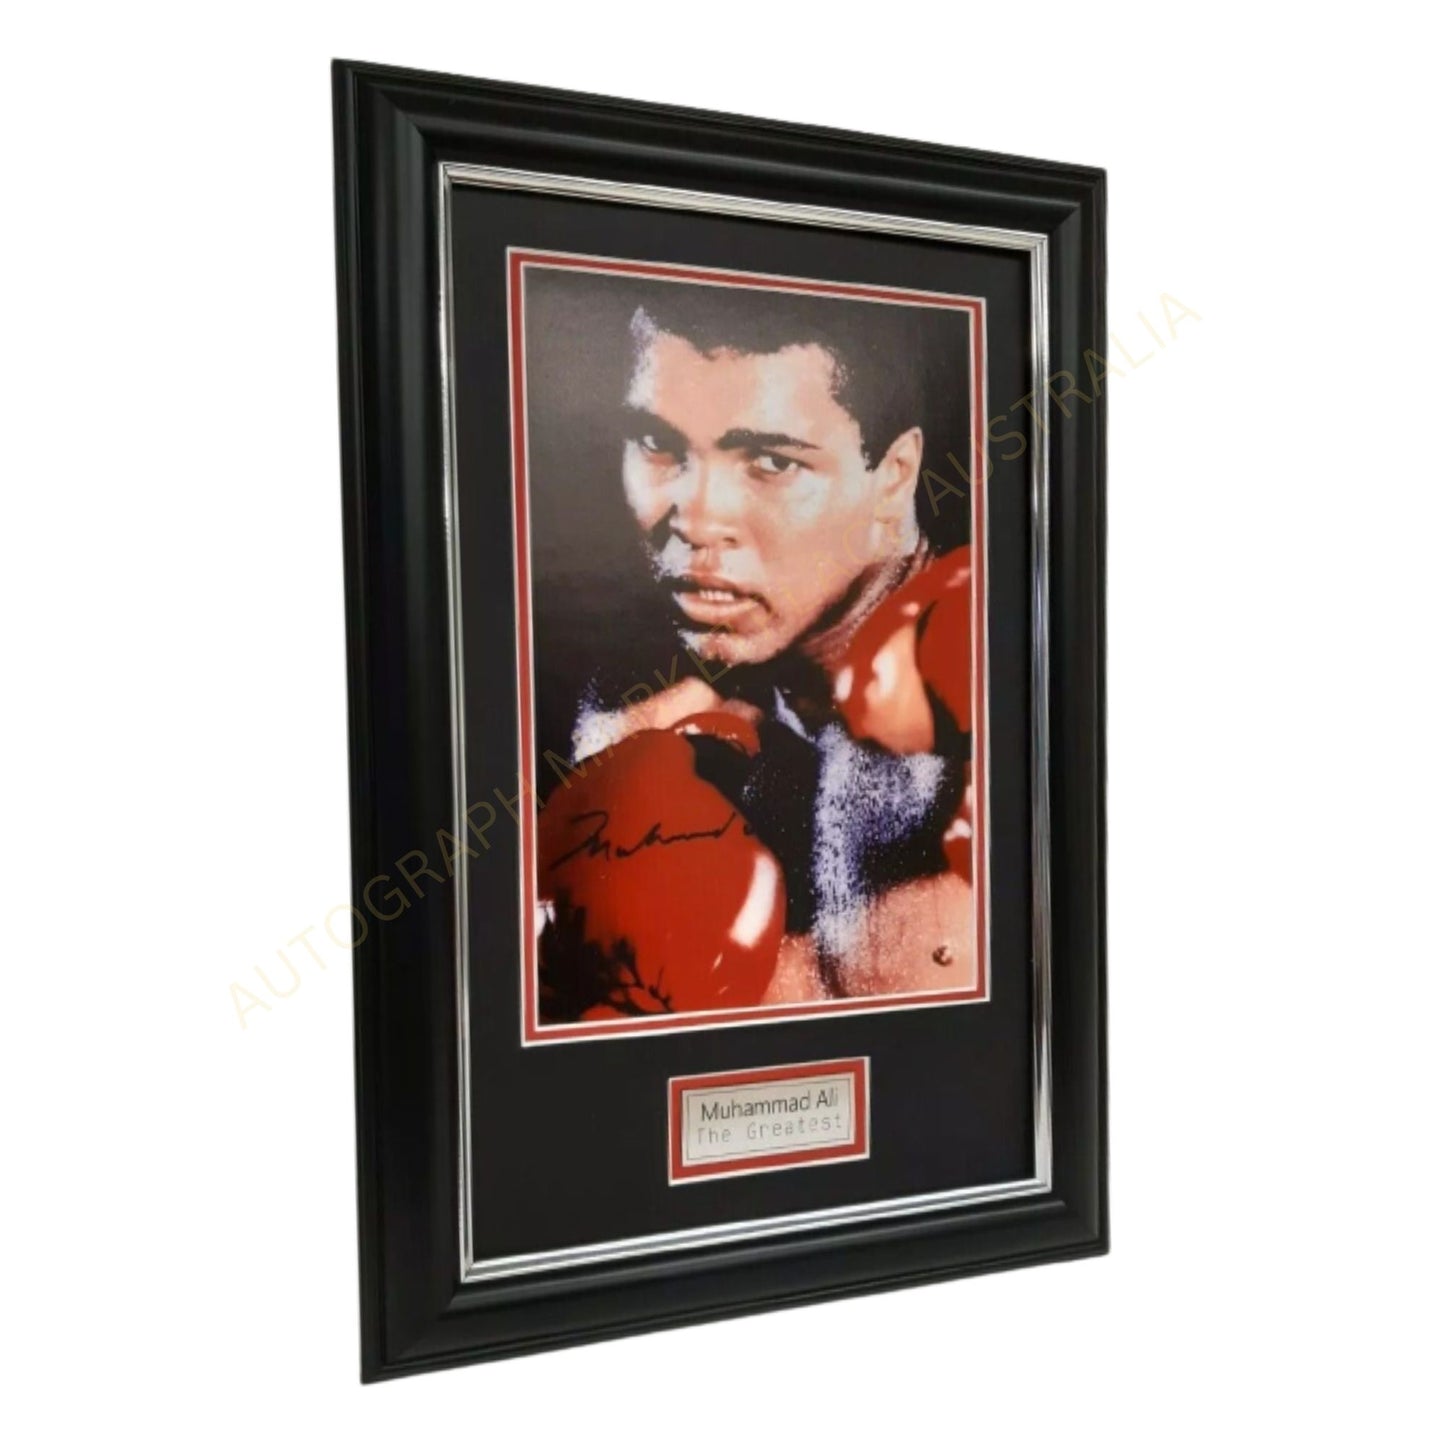 Muhammad Ali The Greatest of All Time Signed Framed Photo Boxing Memorabilia